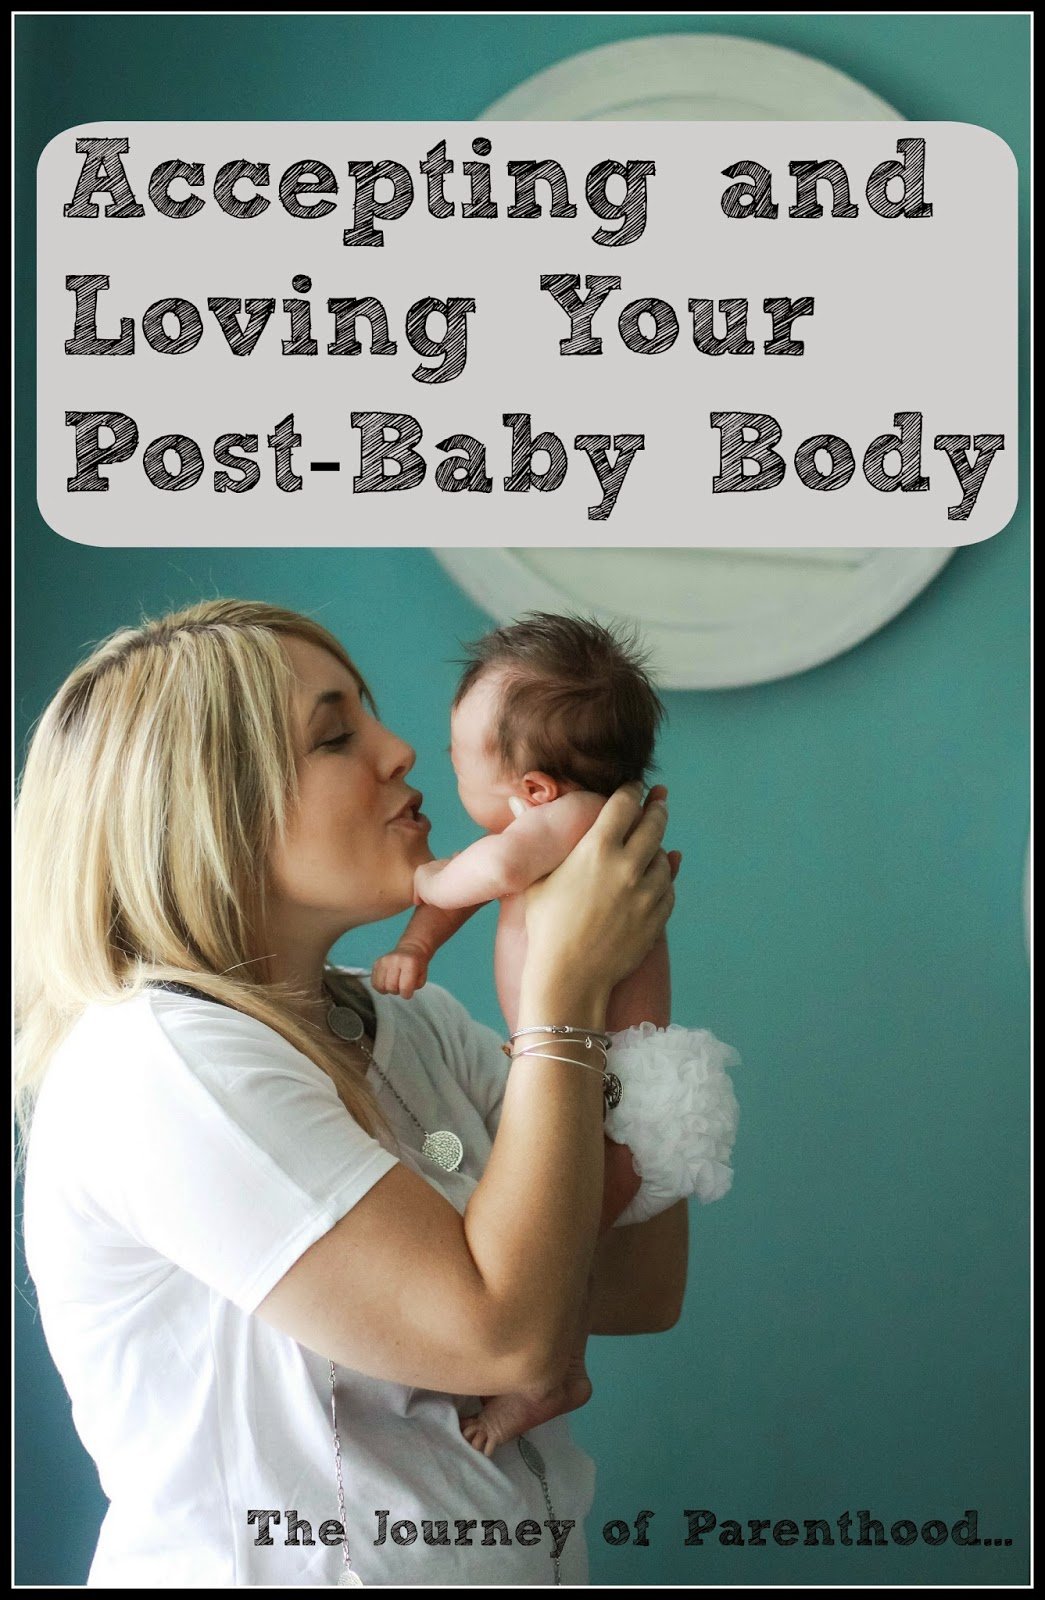 Accepting and Loving Your Post-Baby Body